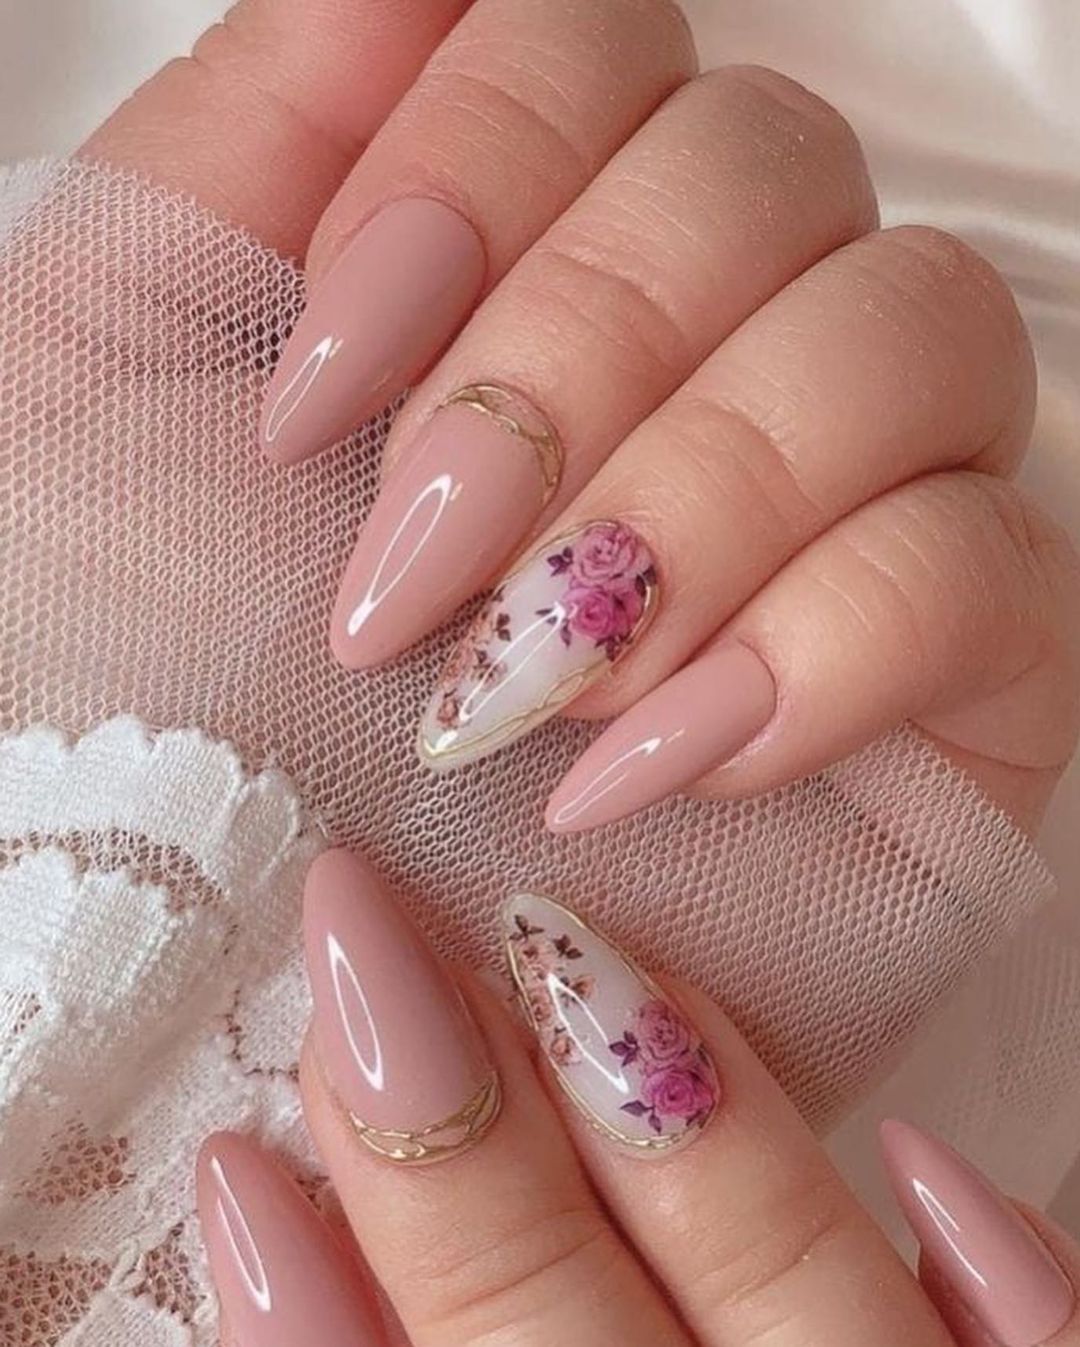 90+ Easy Nails & Nail Art Designs To Try In 2023 images 55